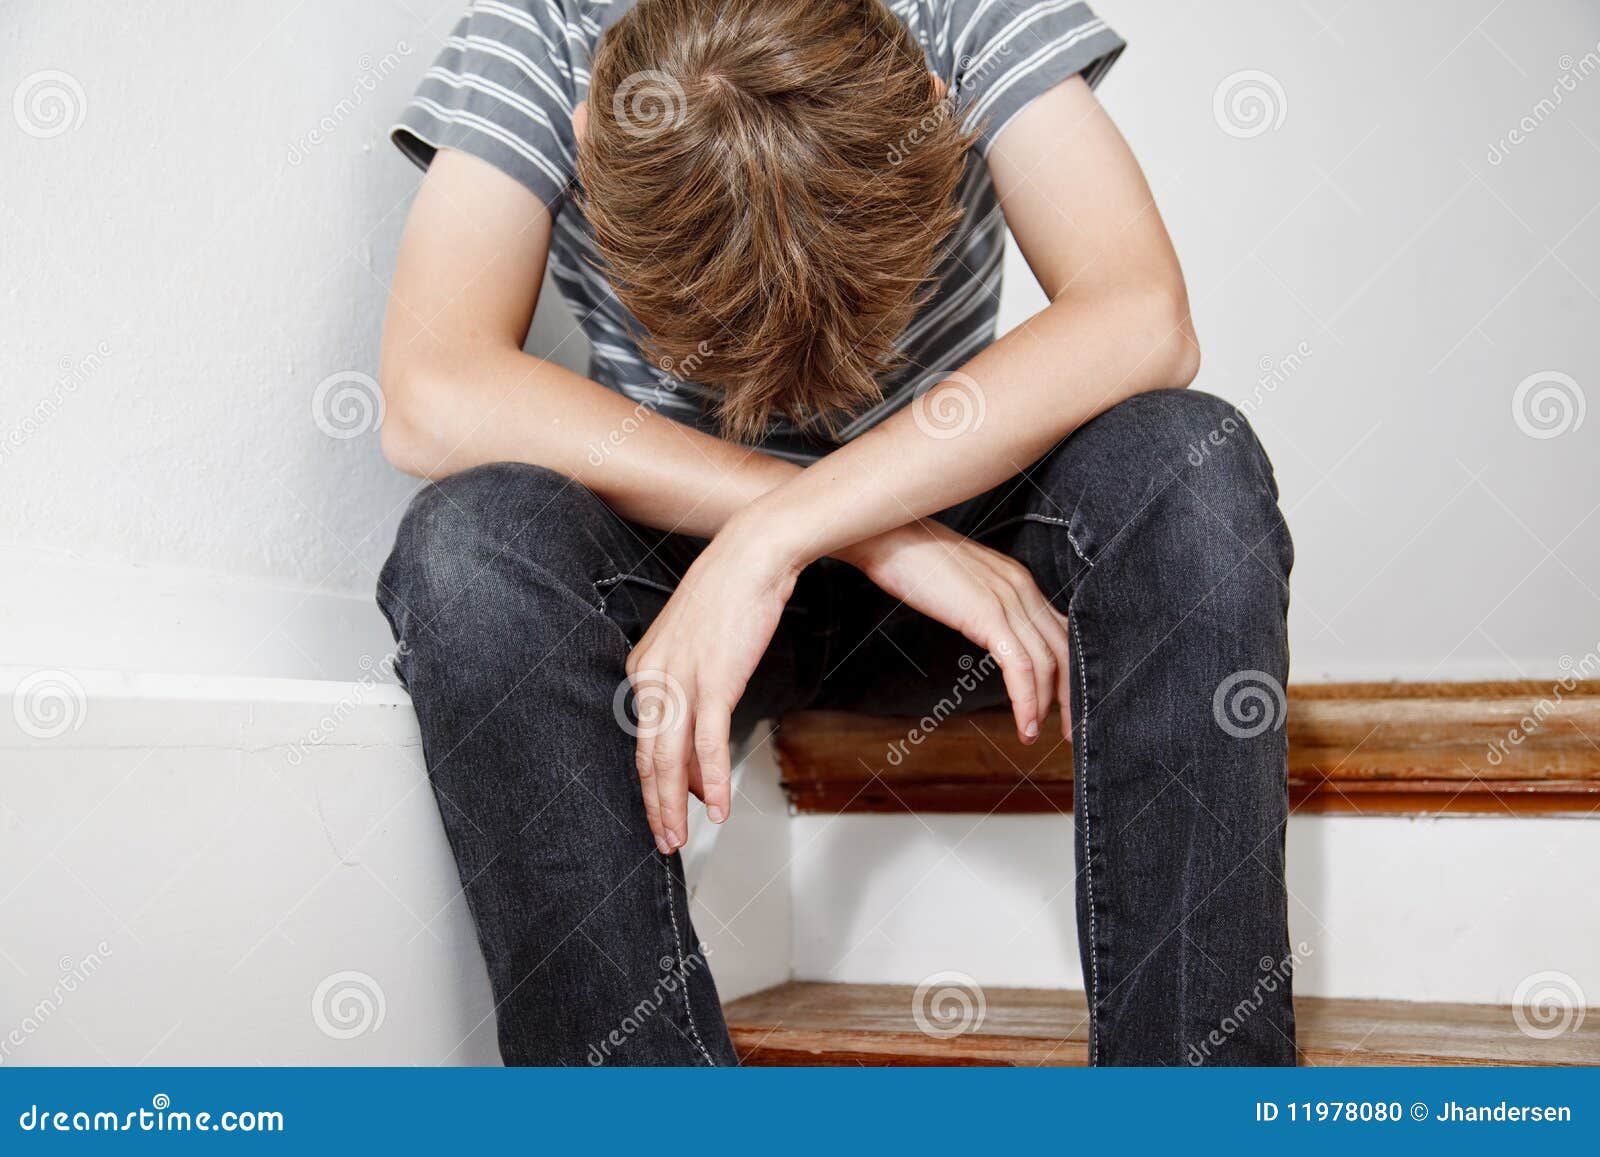 Boy Crying while Sitting on the Stairs Stock Photo - Image of ...